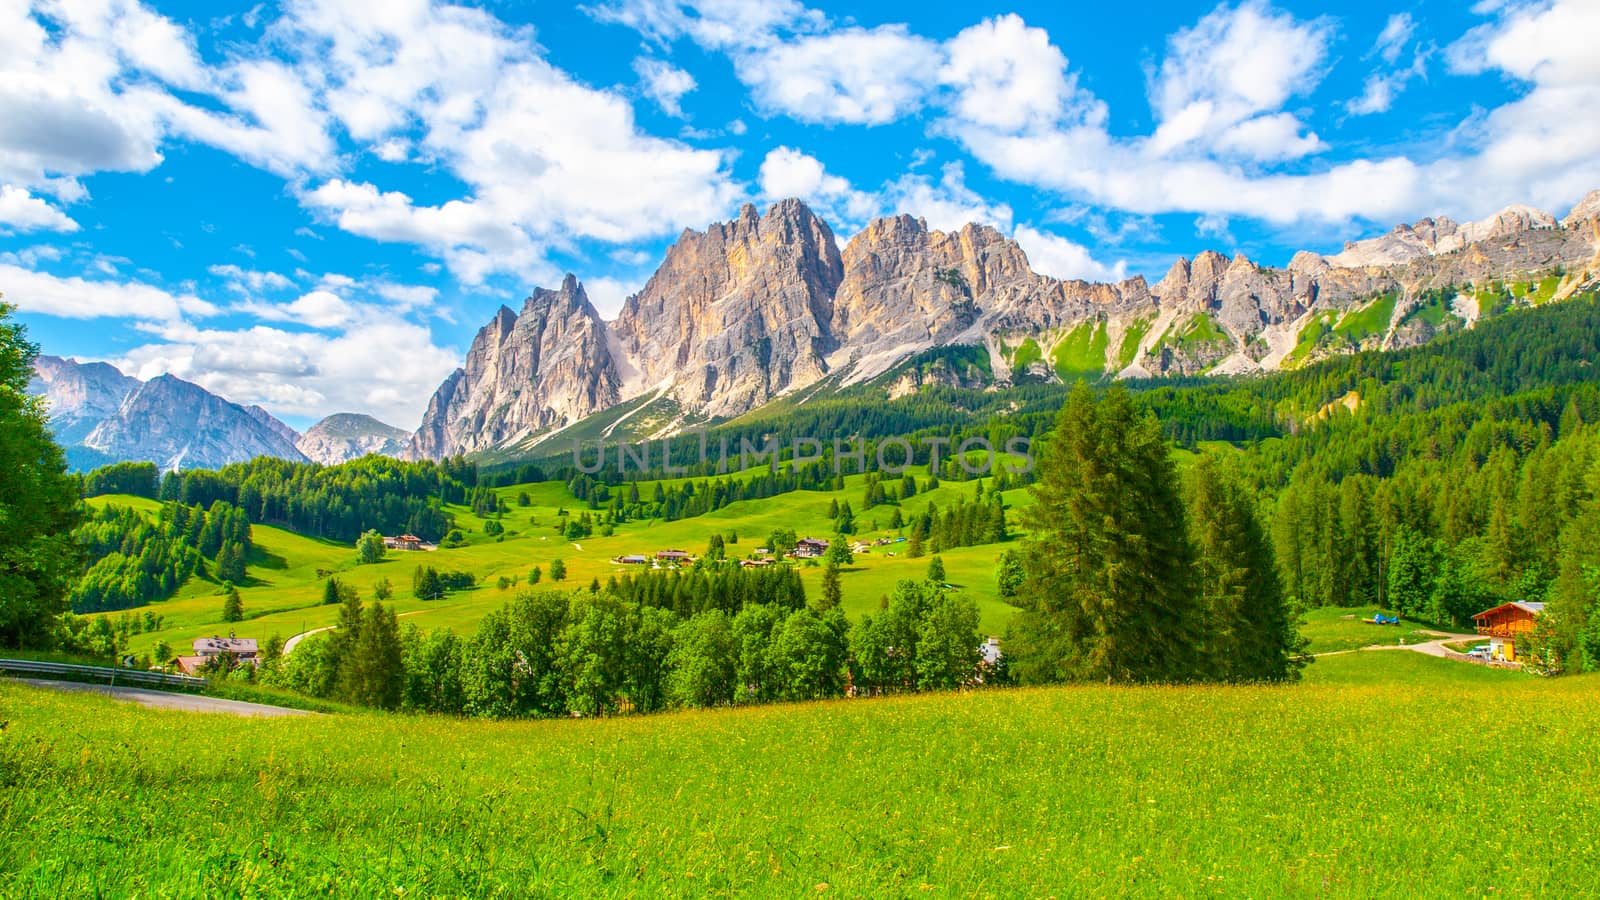 Rocky ridge of Pomagagnon Mountain above Cortina d'Ampezzo with green meadows and blue sky with white summer clouds, Dolomites,, Italy by pyty